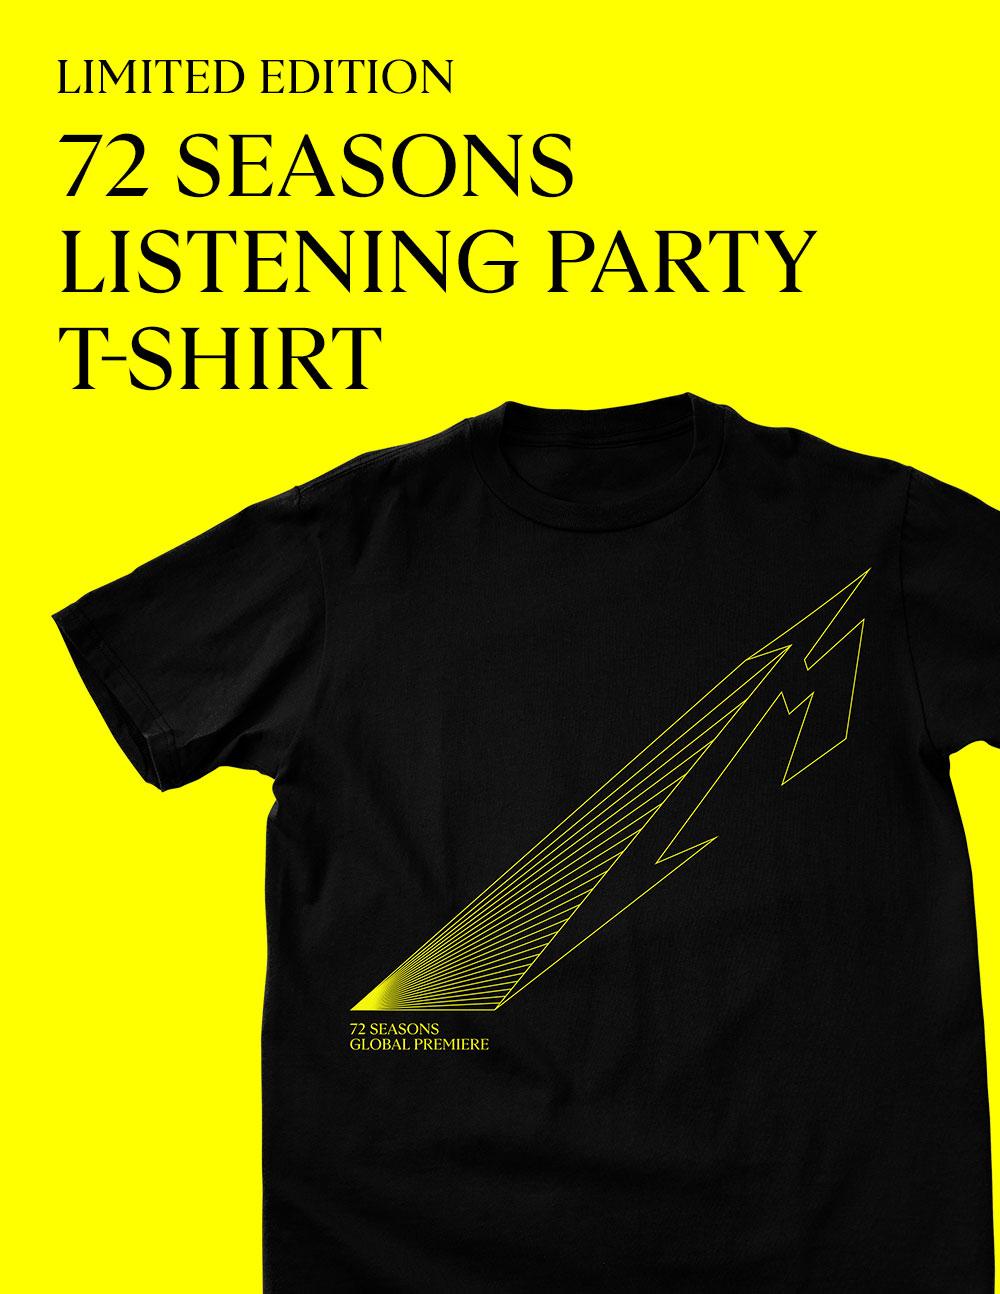 Order the "72 Seasons Listening Party T-Shirt"